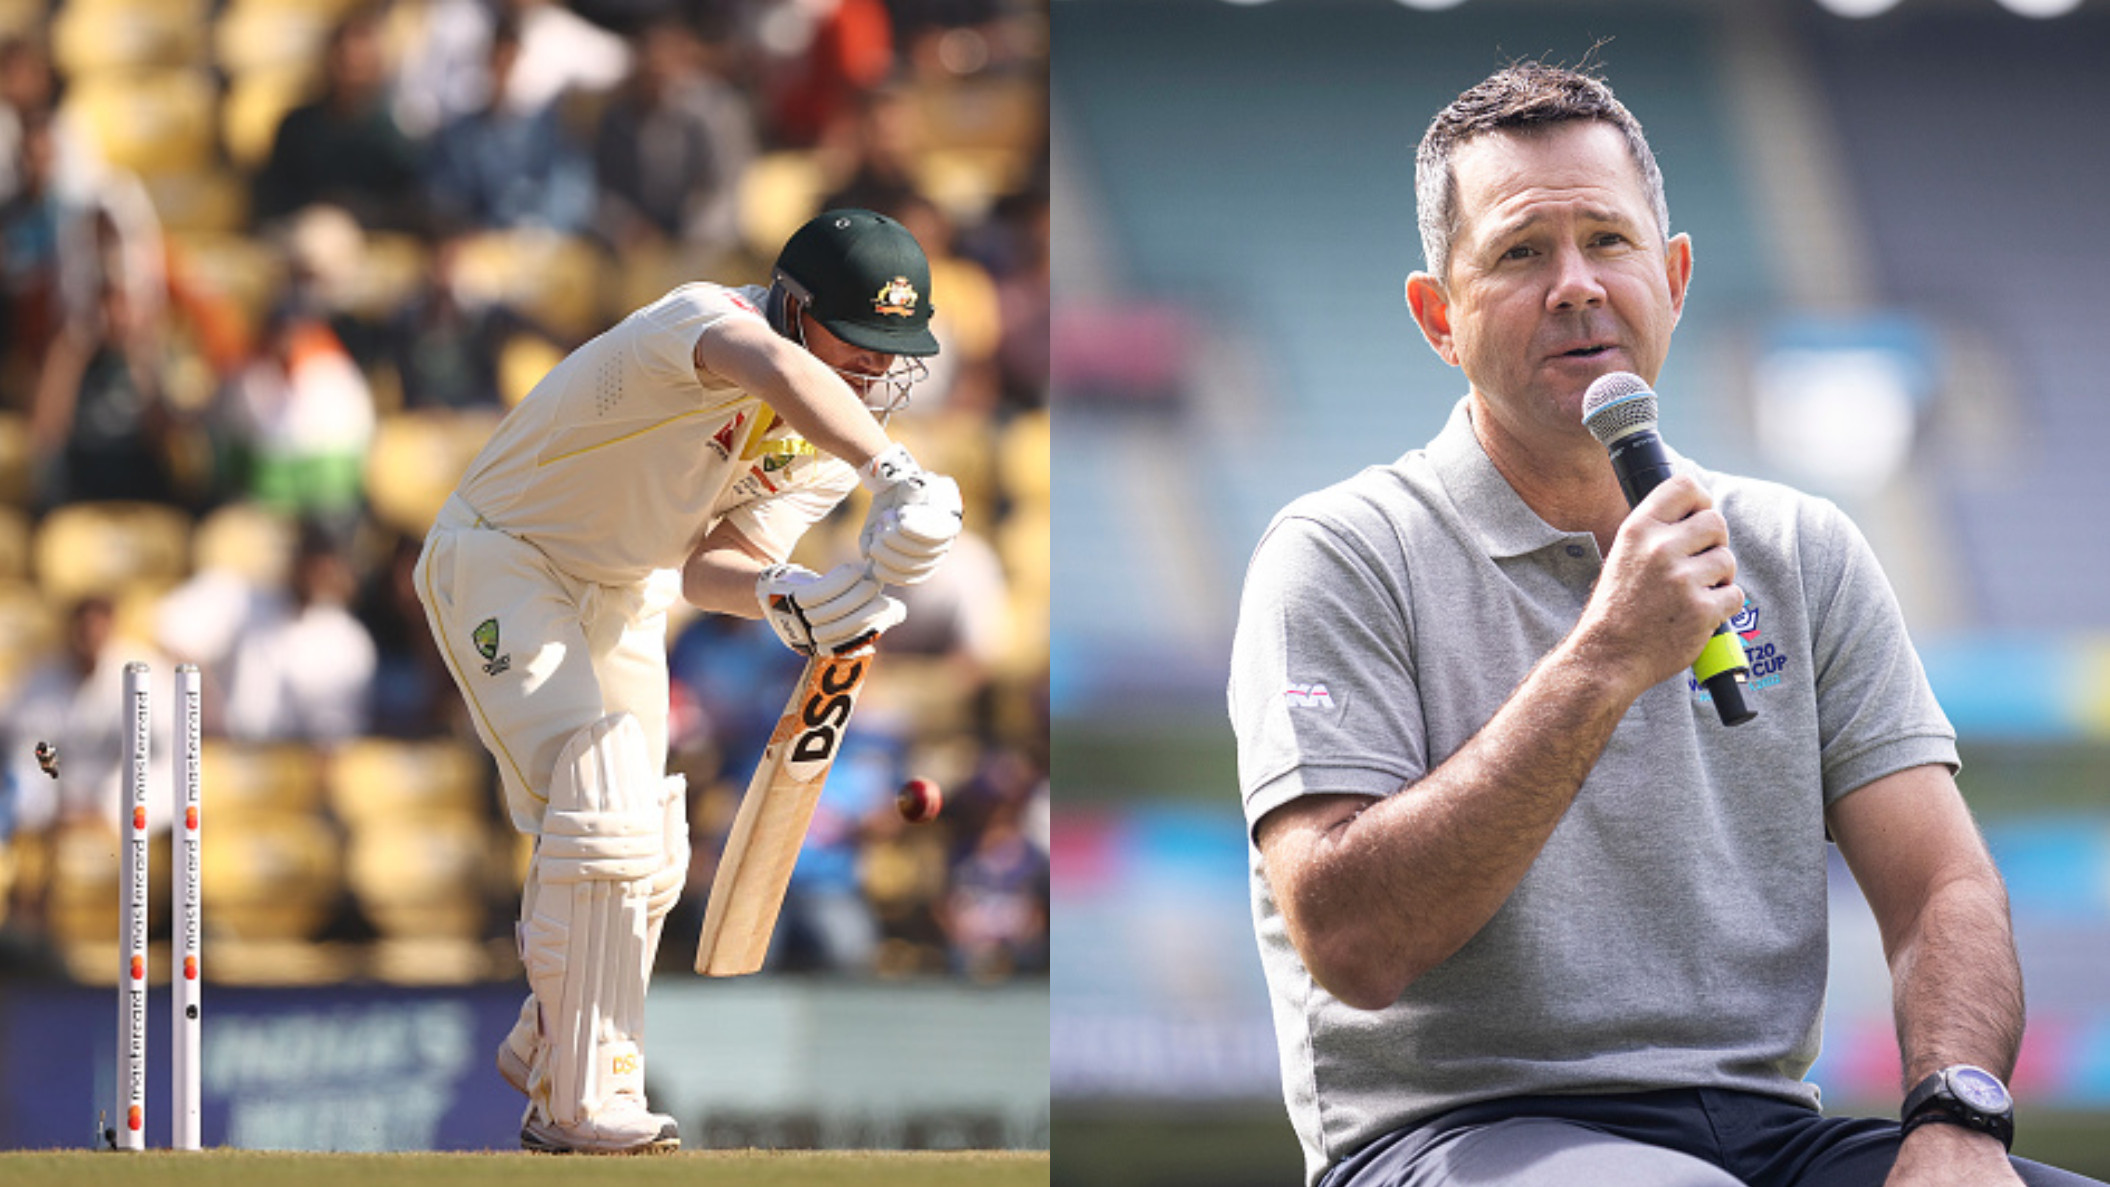 IND v AUS 2023: ‘He knows in his own heart, he needs to score’- Ponting says Warner could be benched after 1st innings failure